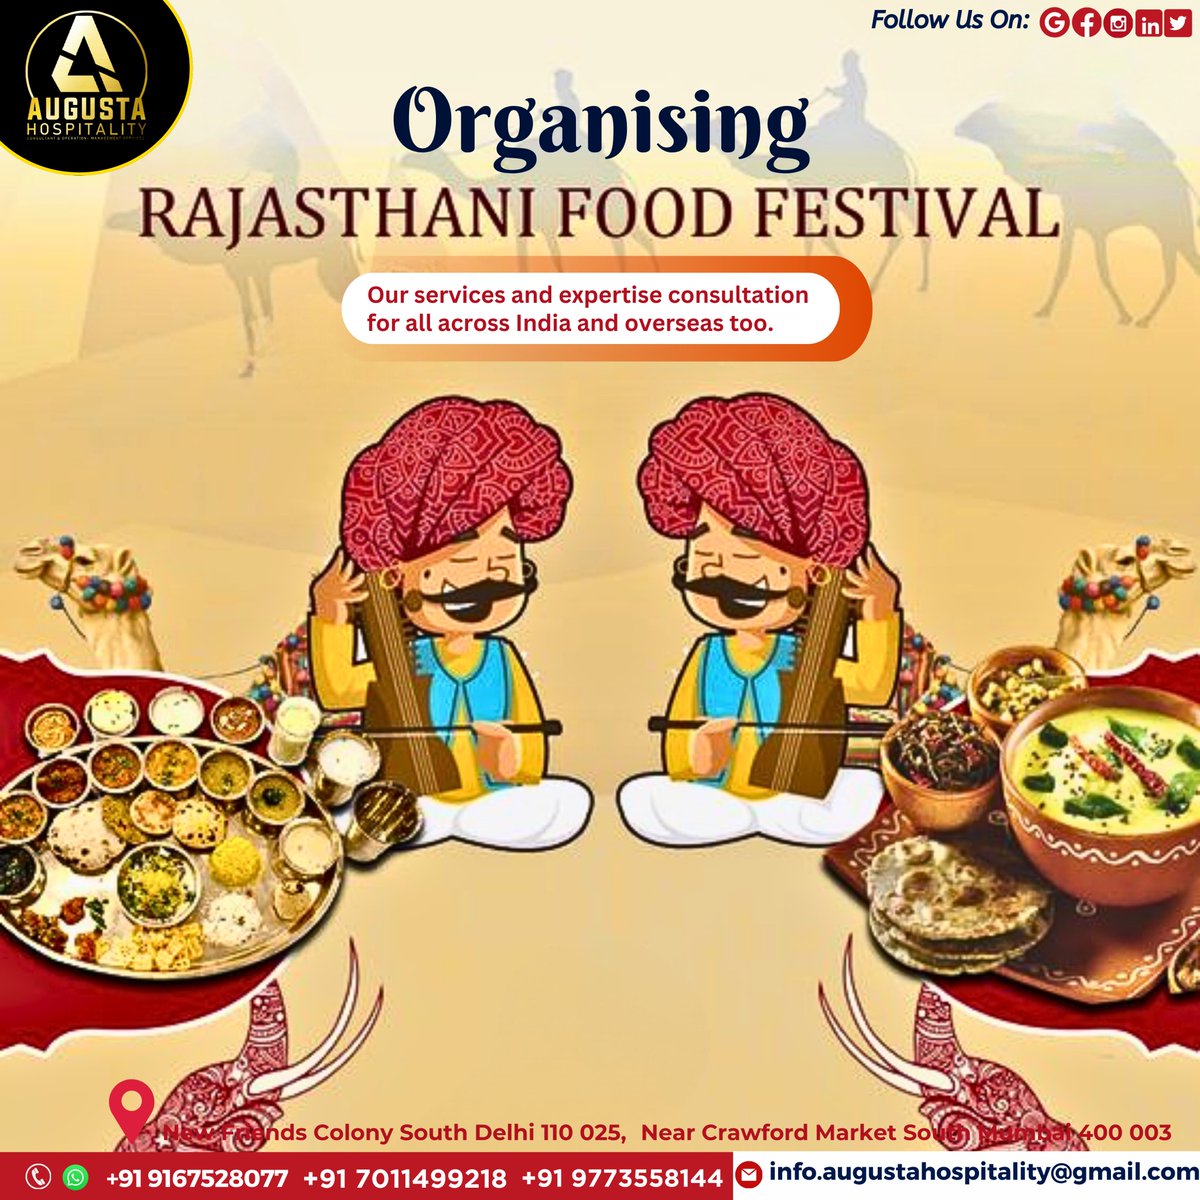 Augusta Hospitality Consultant & Operation -Management Services
Organizing #rajasthanfoodfestival Indulge in the rich flavors of Rajasthan!

#RajasthaniFoodFestival #rajasthanifood #rajasthani #indian #cuisine #incredibleindia #foodfestival #FoodFest #FoodFiesta